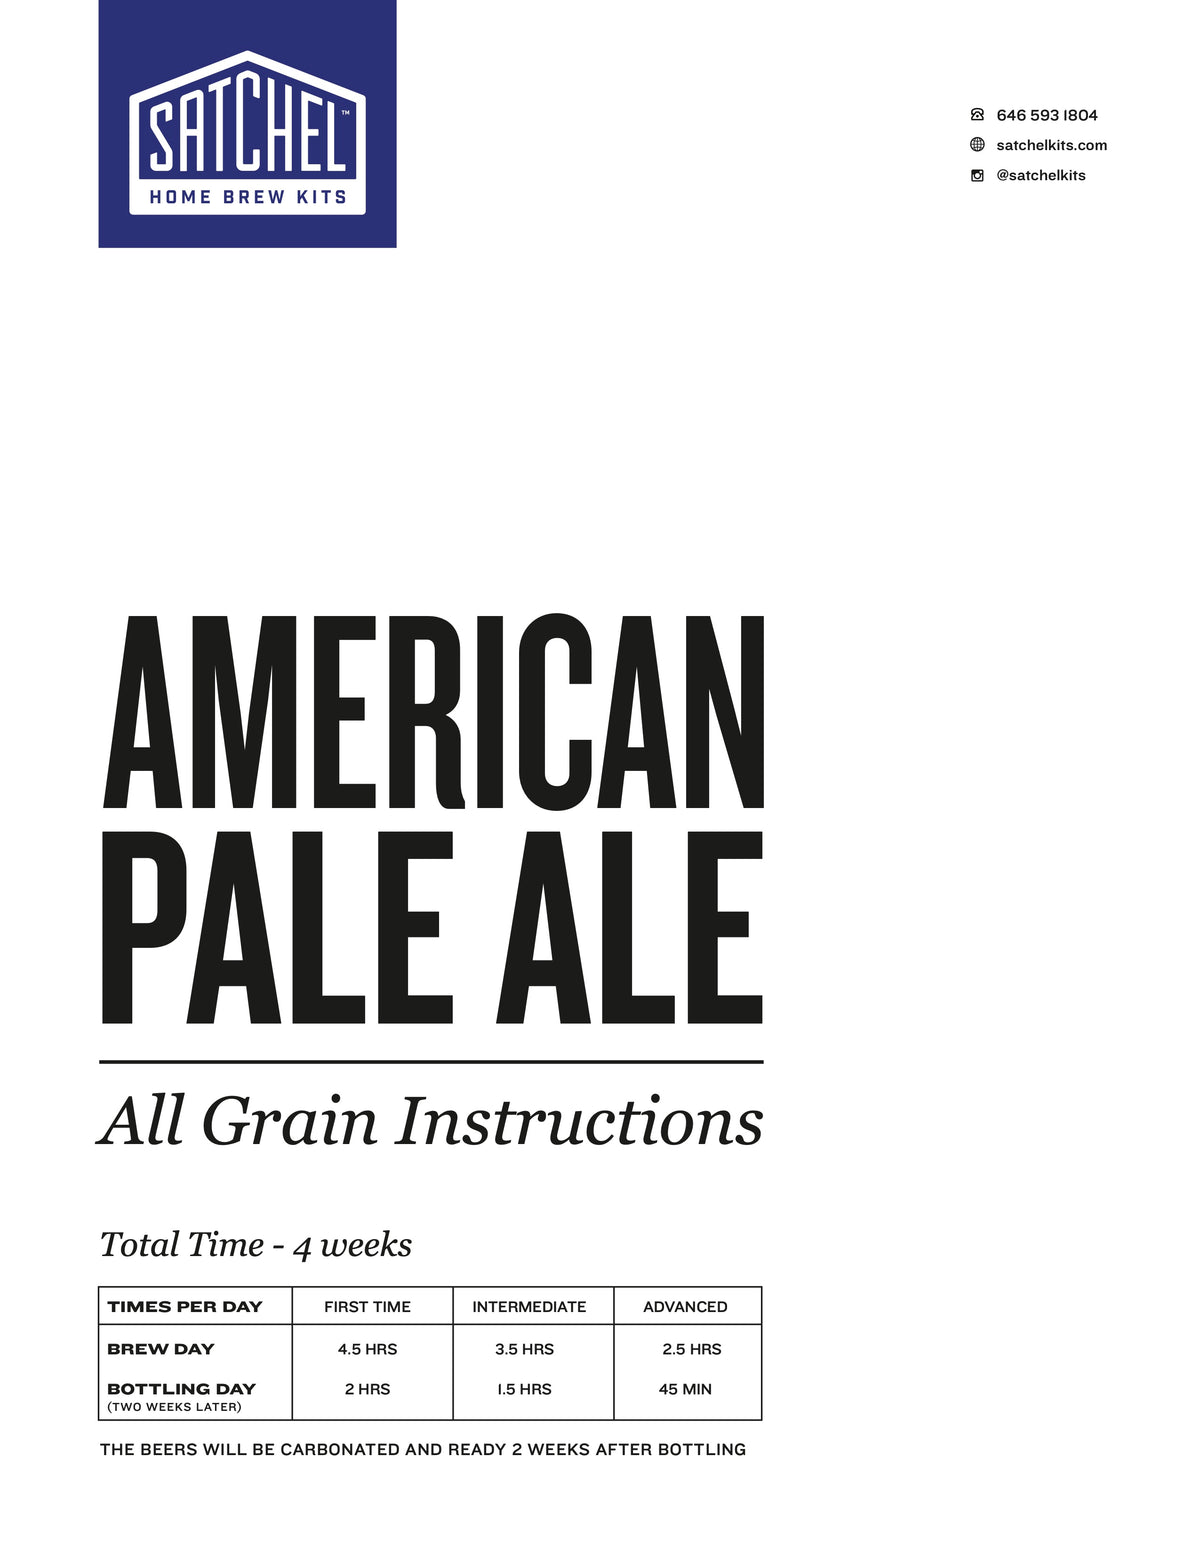 – This blog highlight essential brewing